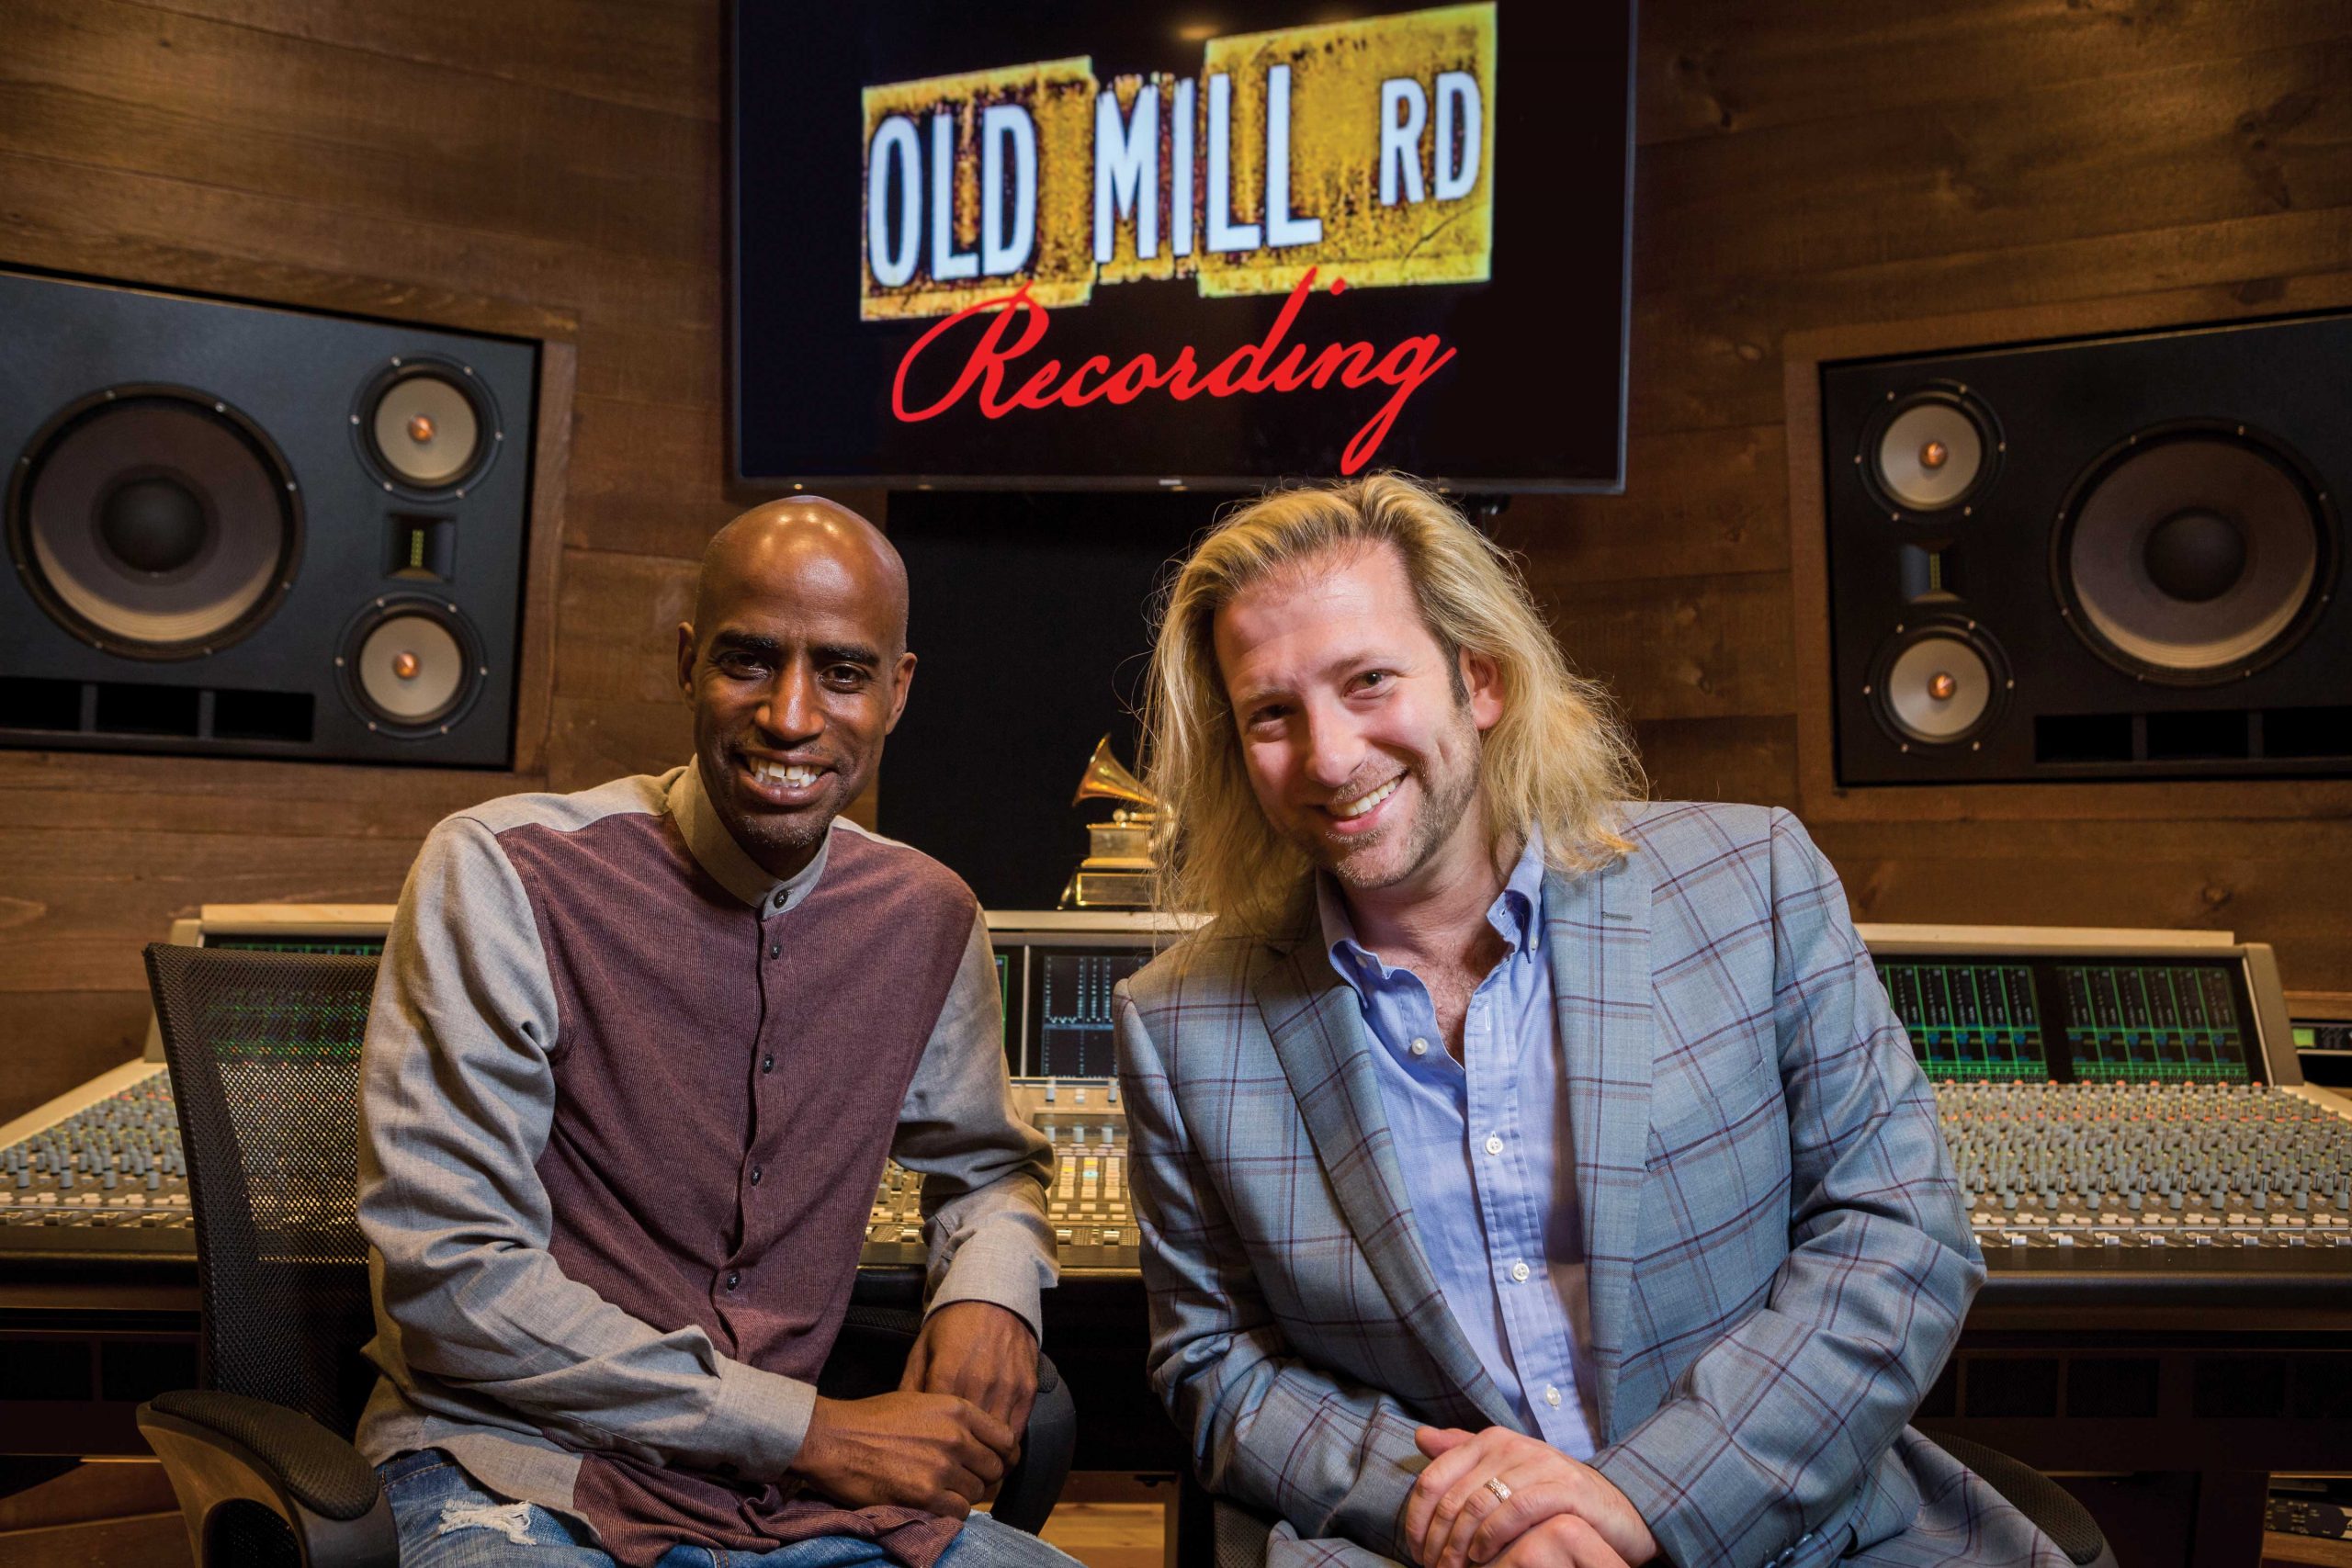 Old Mill Road Recording offers musicians, performers natural inspiration